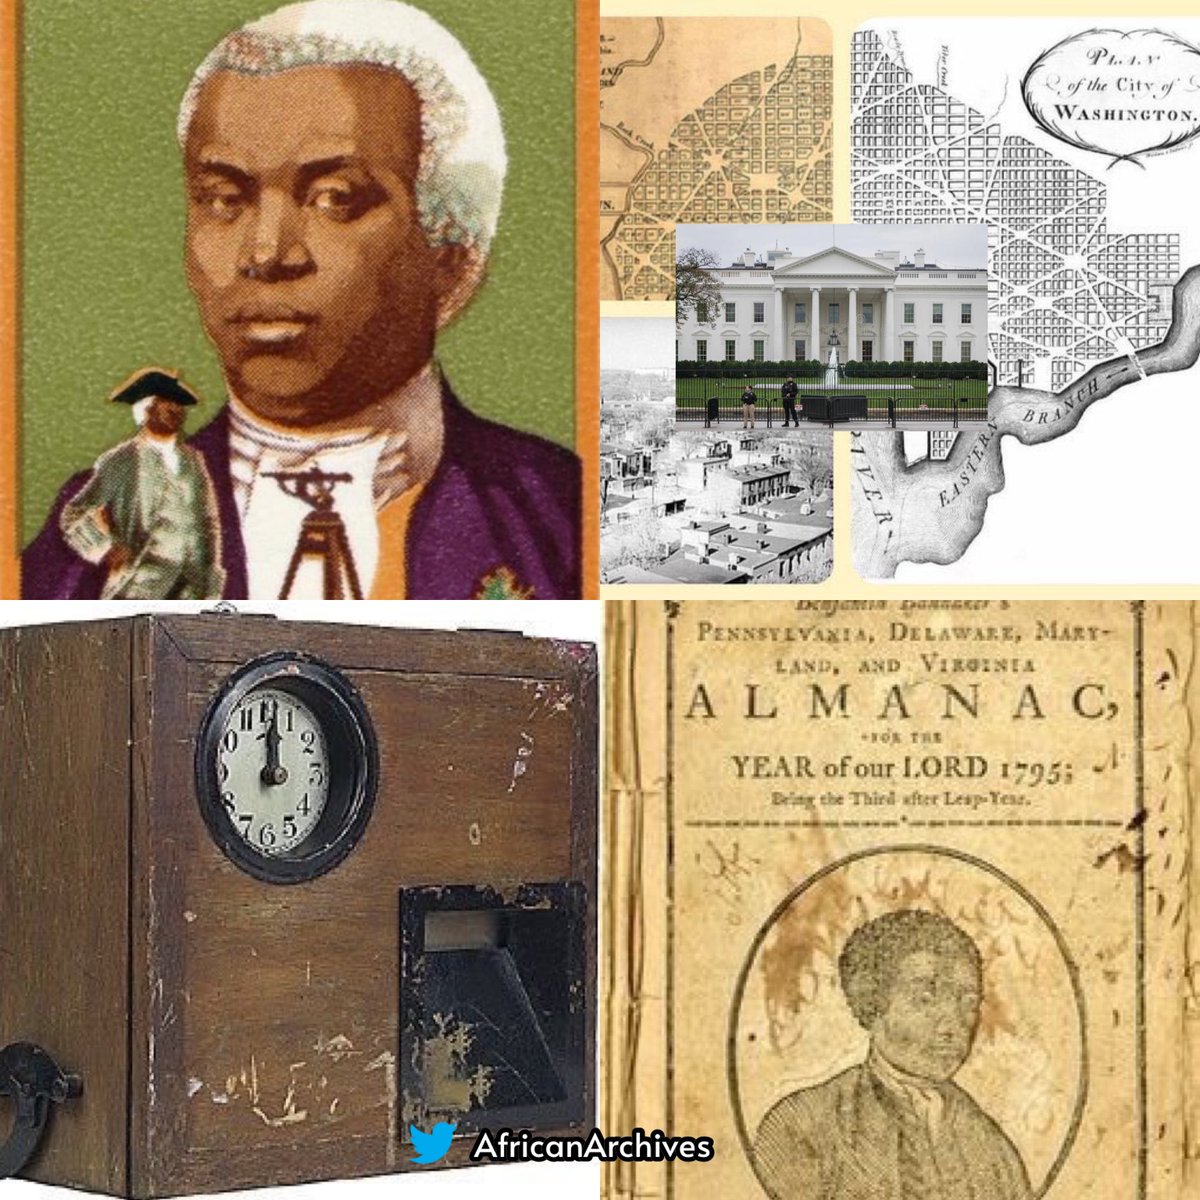 In 1753, Benjamin Banneker created the first functioning clock in the U.S entirely out of wood, it was so advanced it kept accurate time for over 50 years. He also helped survey and design Washington D.C. During his funeral, all his belongings including the clock were destroyed…